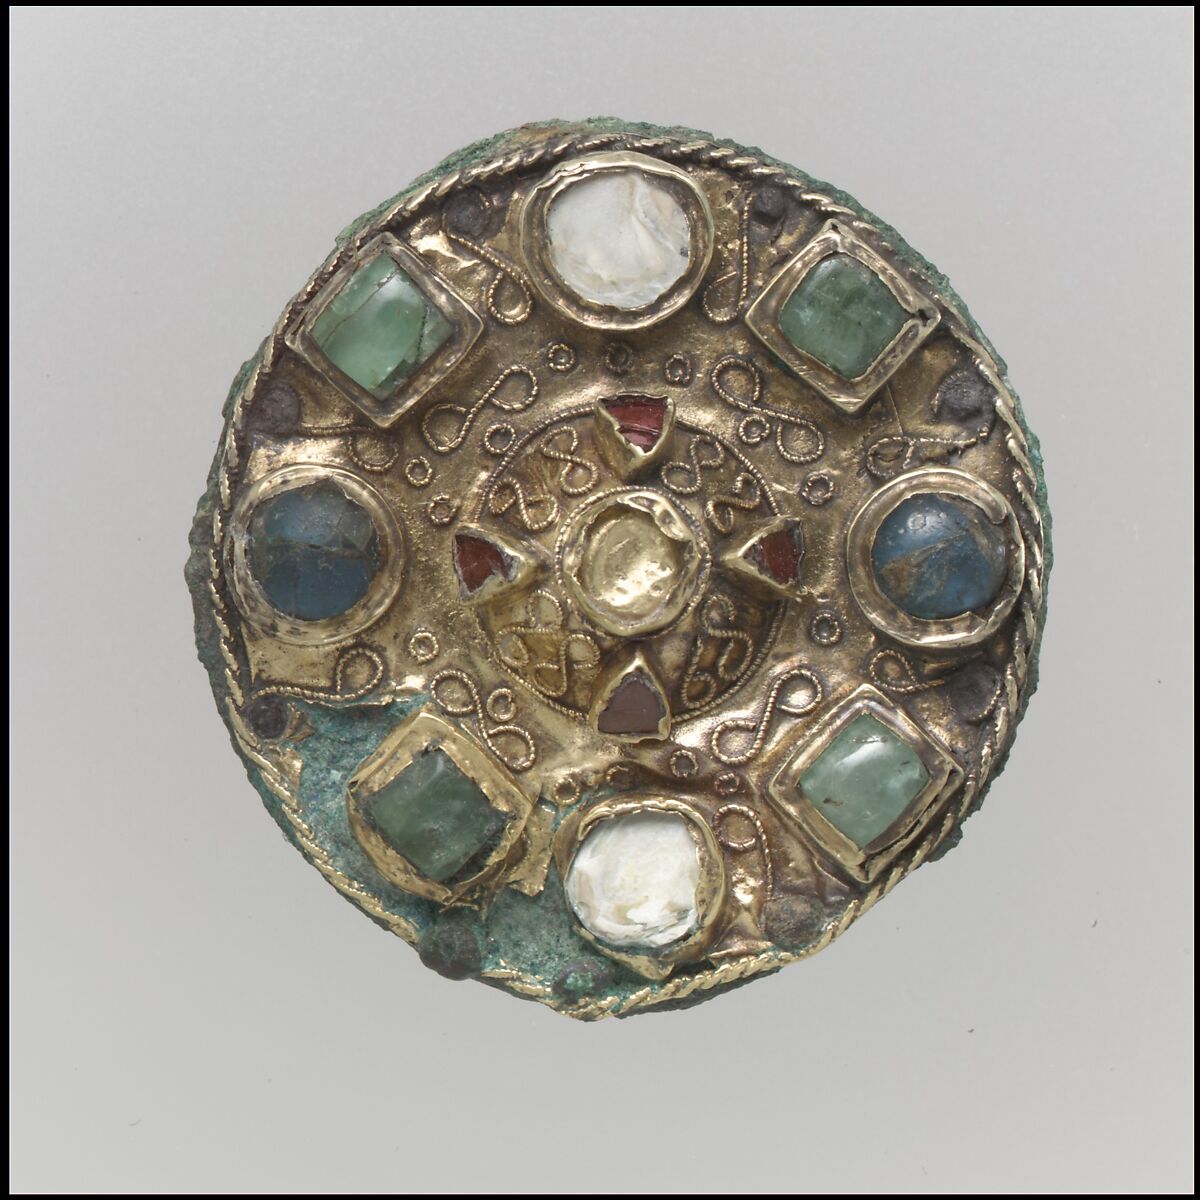 Disk Brooch, Gold, filigree, mother-of-pearl, garnets, blue and green stones, Frankish 